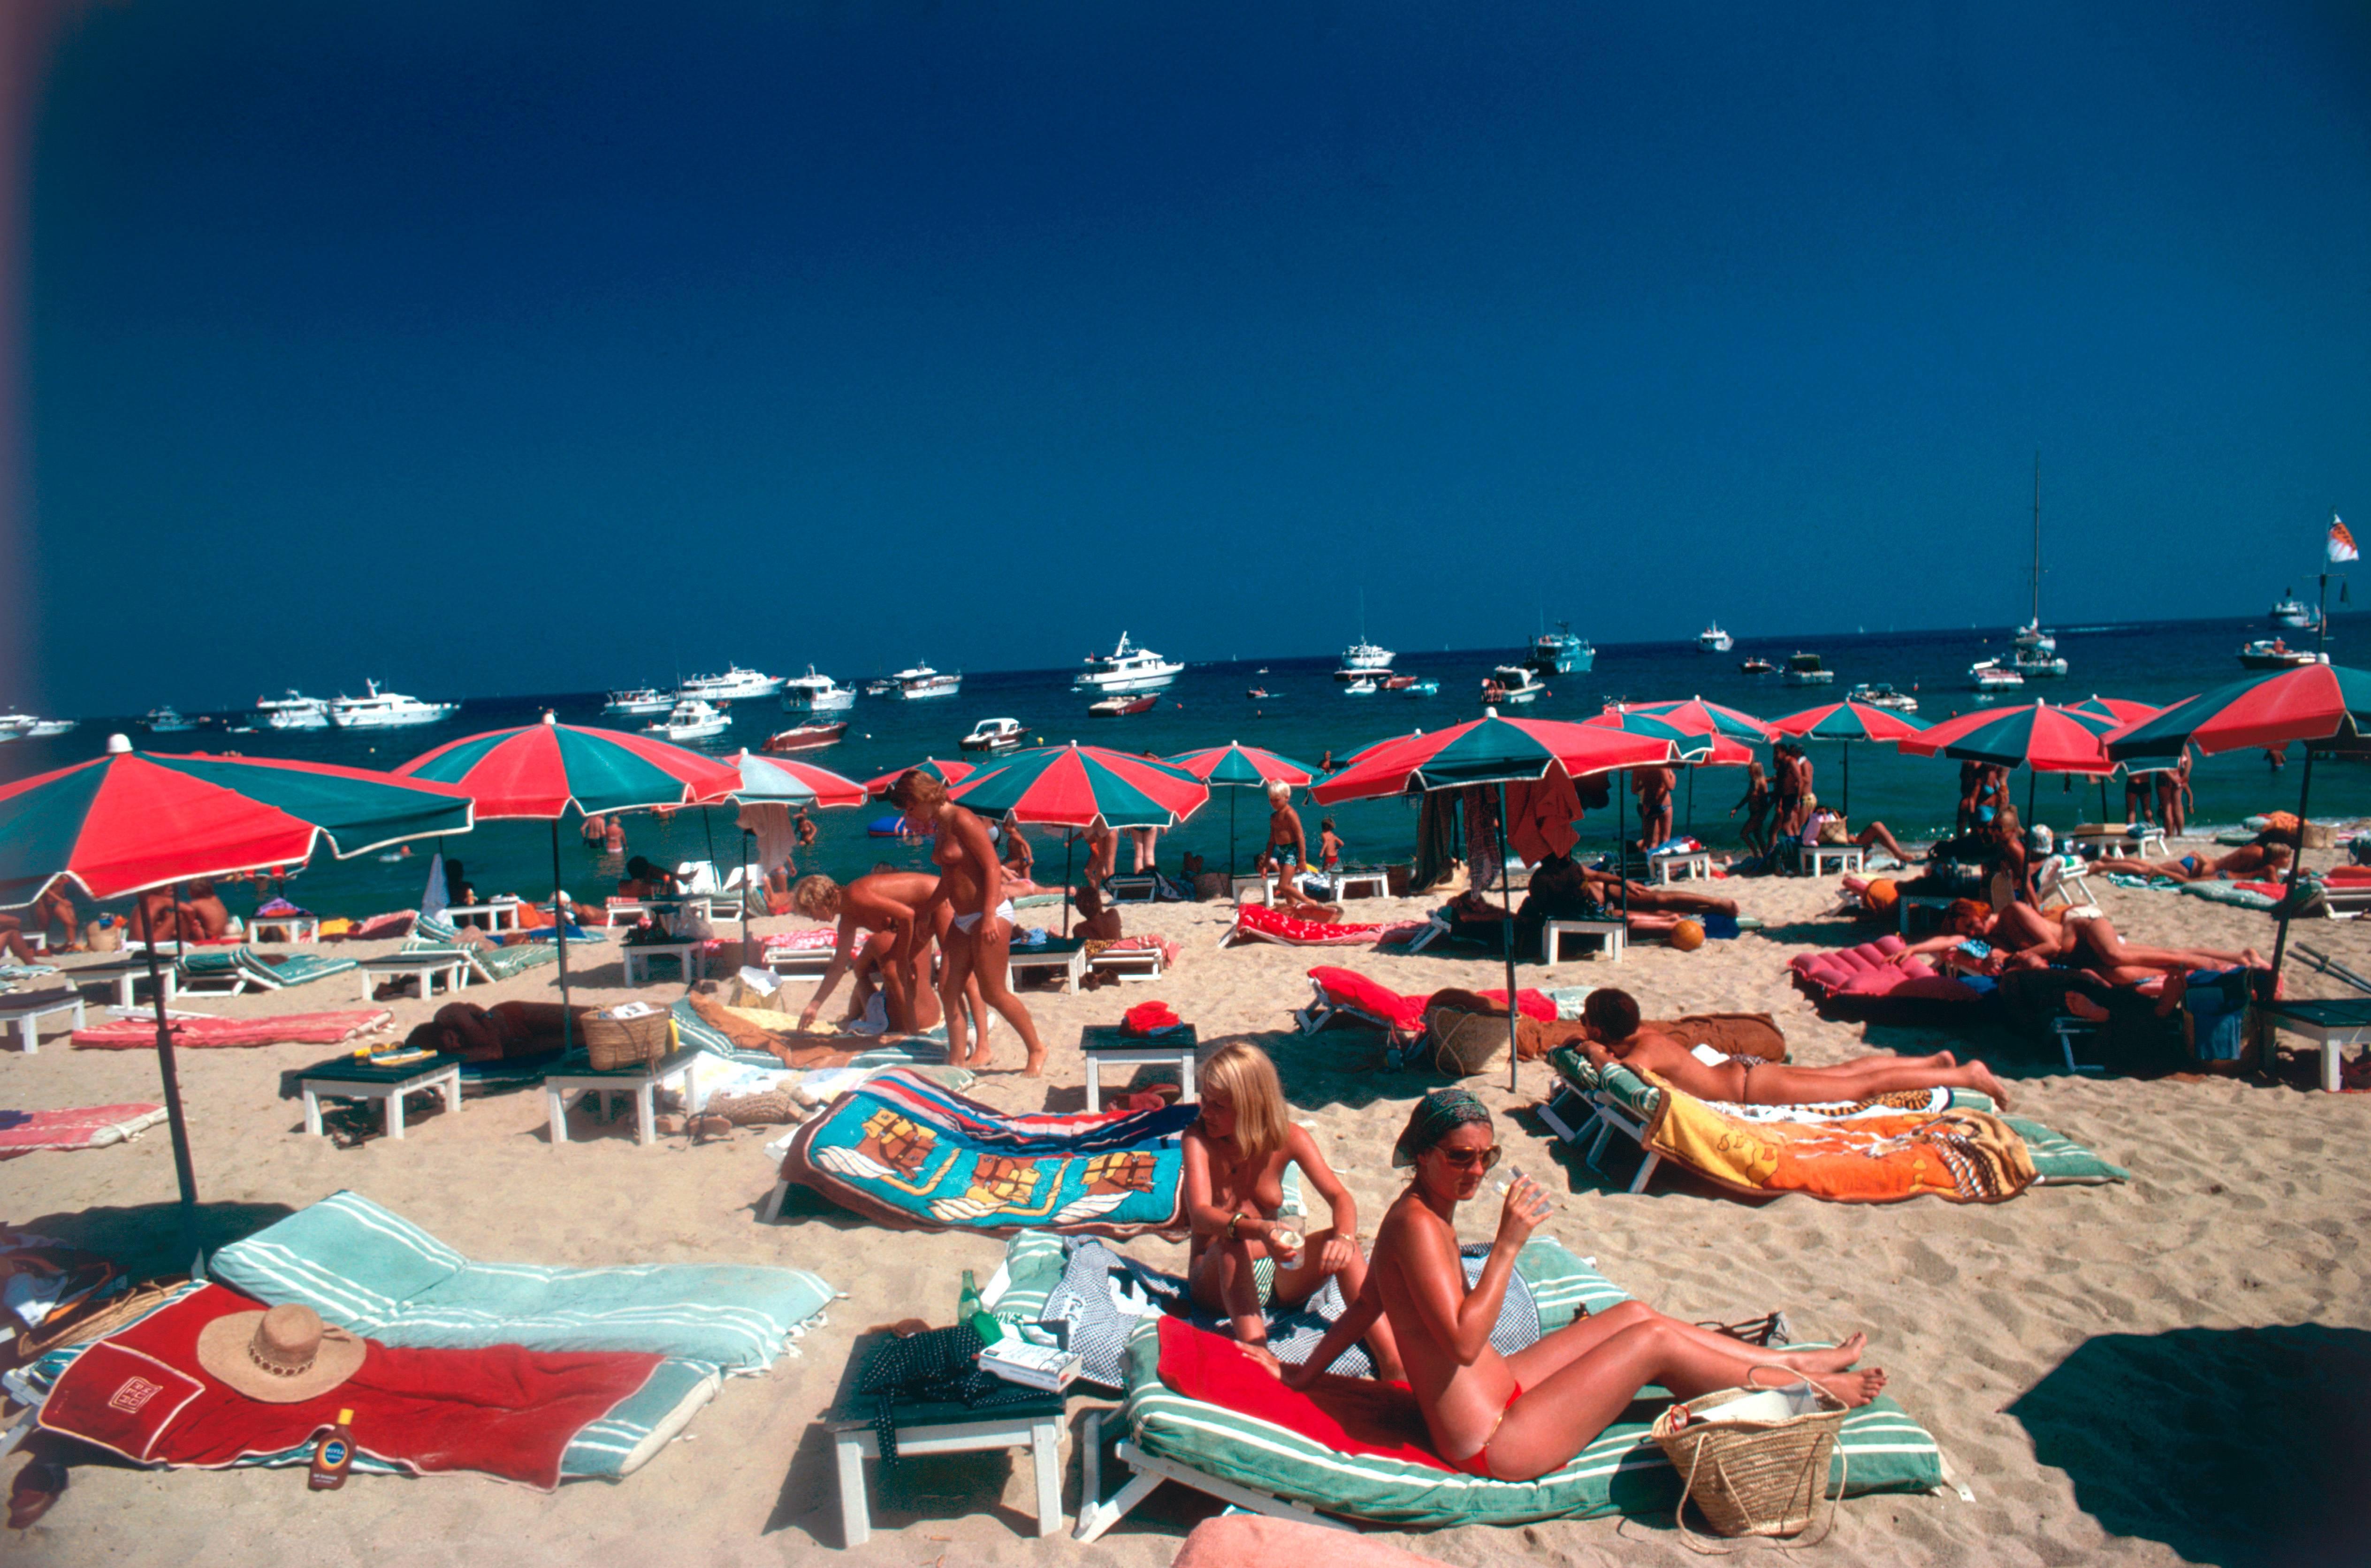 Sunbathers on the beach at St. Tropez, France, 1977. (Photo by Slim Aarons/Hulton Archive/Getty Images)

C-type print from the original transparency held at the Getty Images Archive, London. Numbered and stamped by The Slim Aarons Estate. 